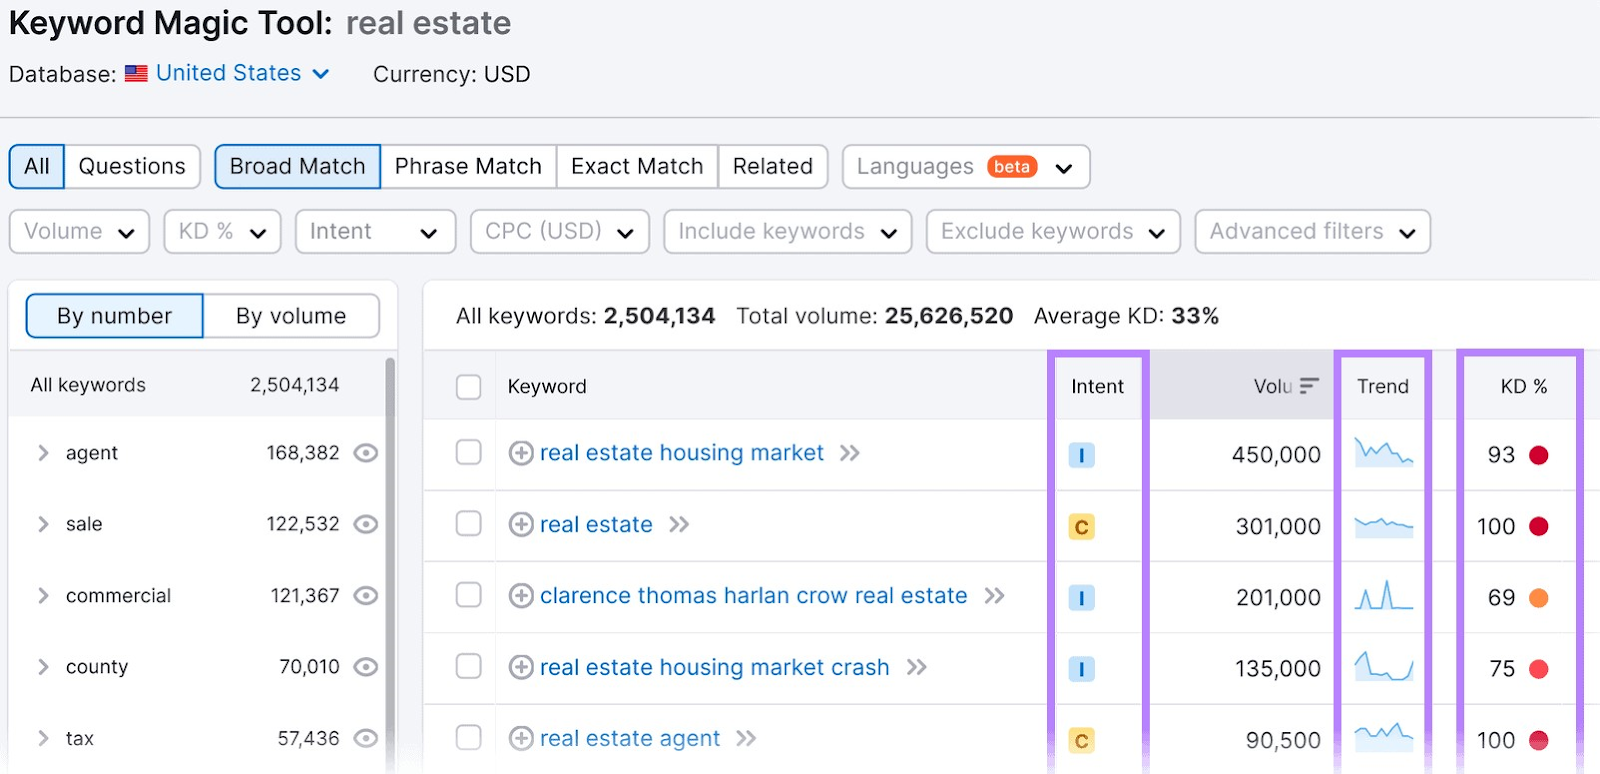 Keyword Magic Tool results for "real estate" with key metrics highlighted